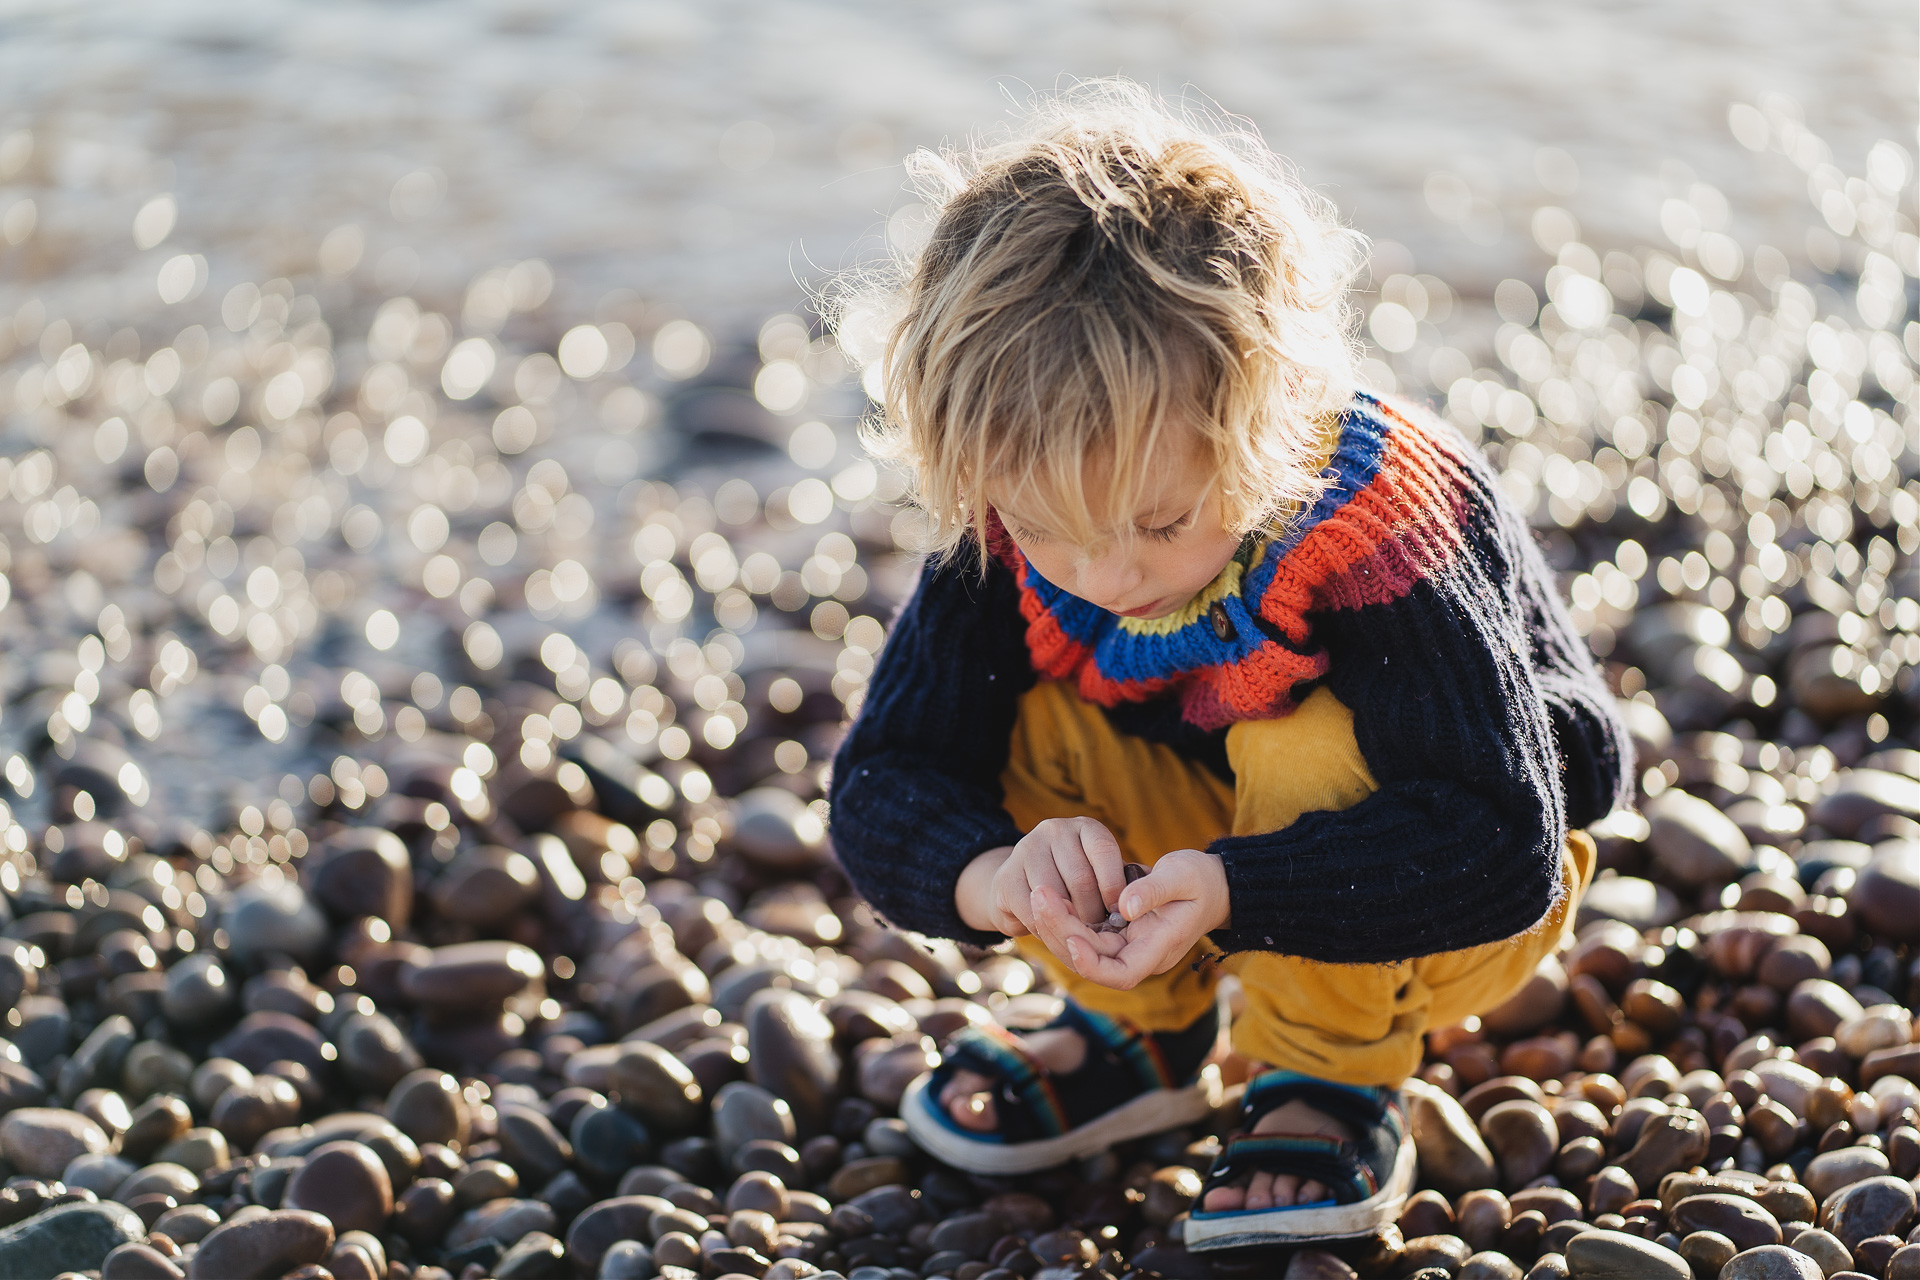 A young child picking up stones on a pebble beach